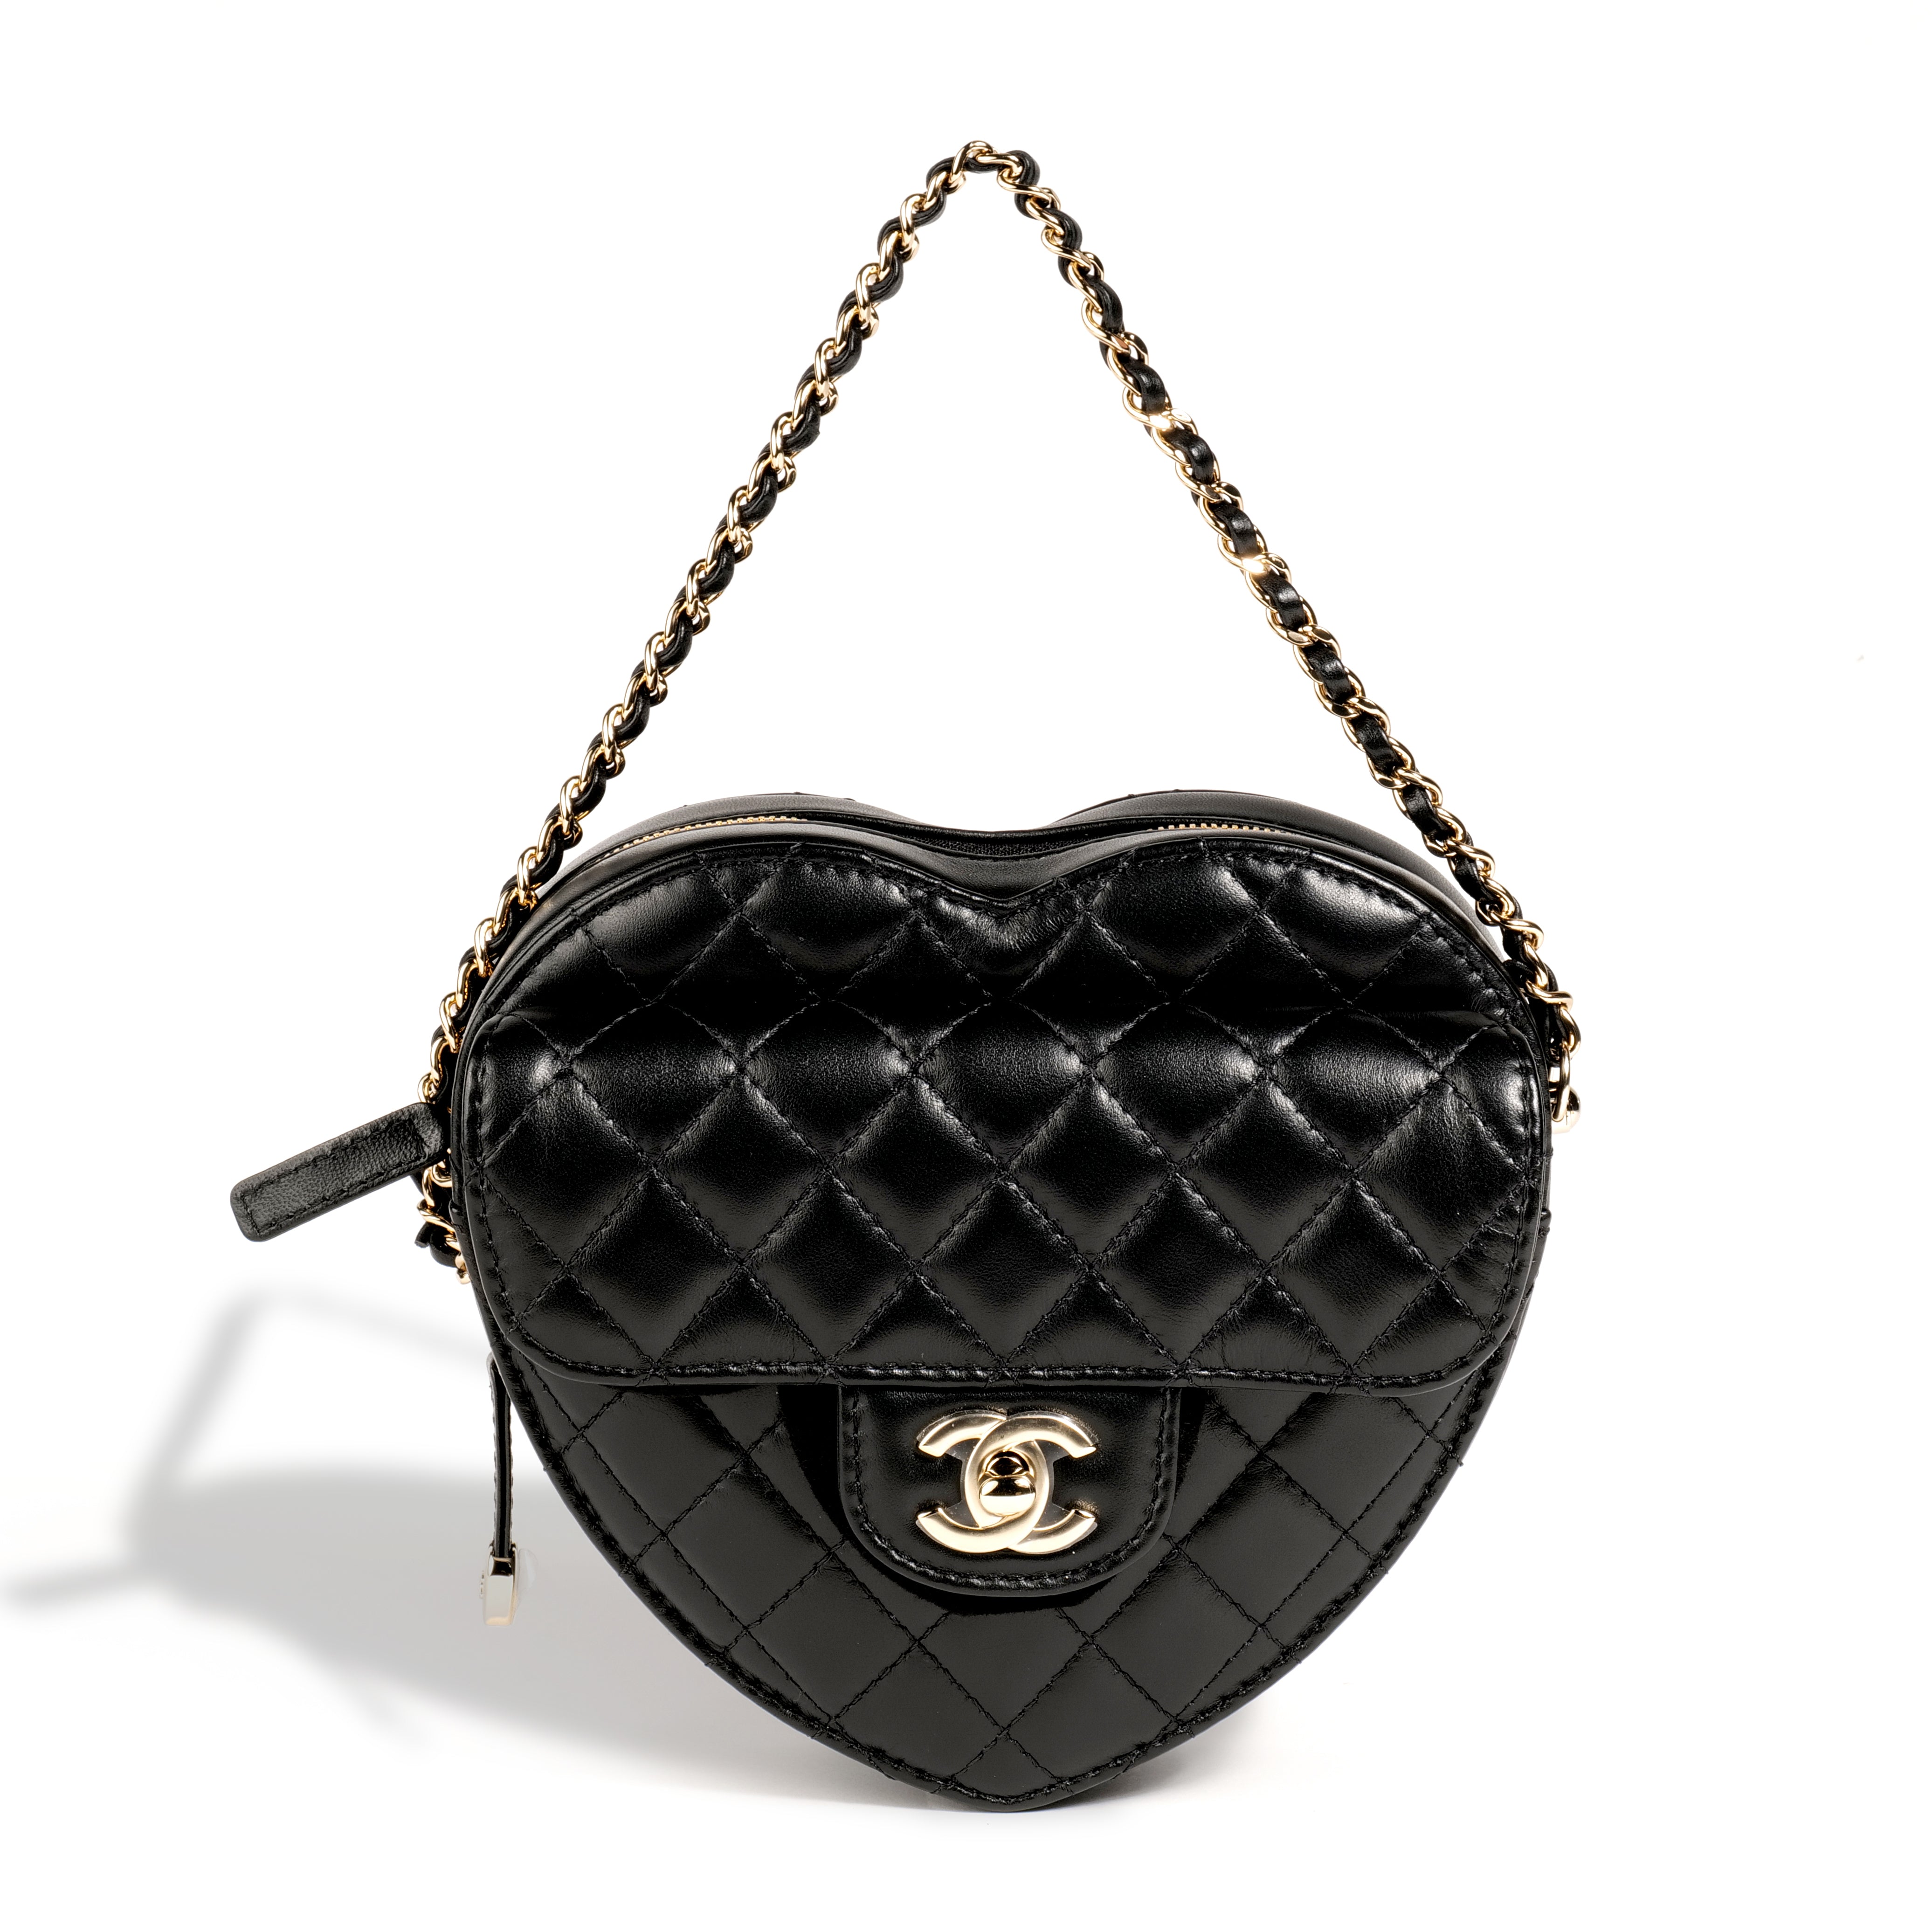 CHANEL HEART BAGS are Finally Here! Spring Summer 2022 CHANEL Heart Bag  REVIEW 